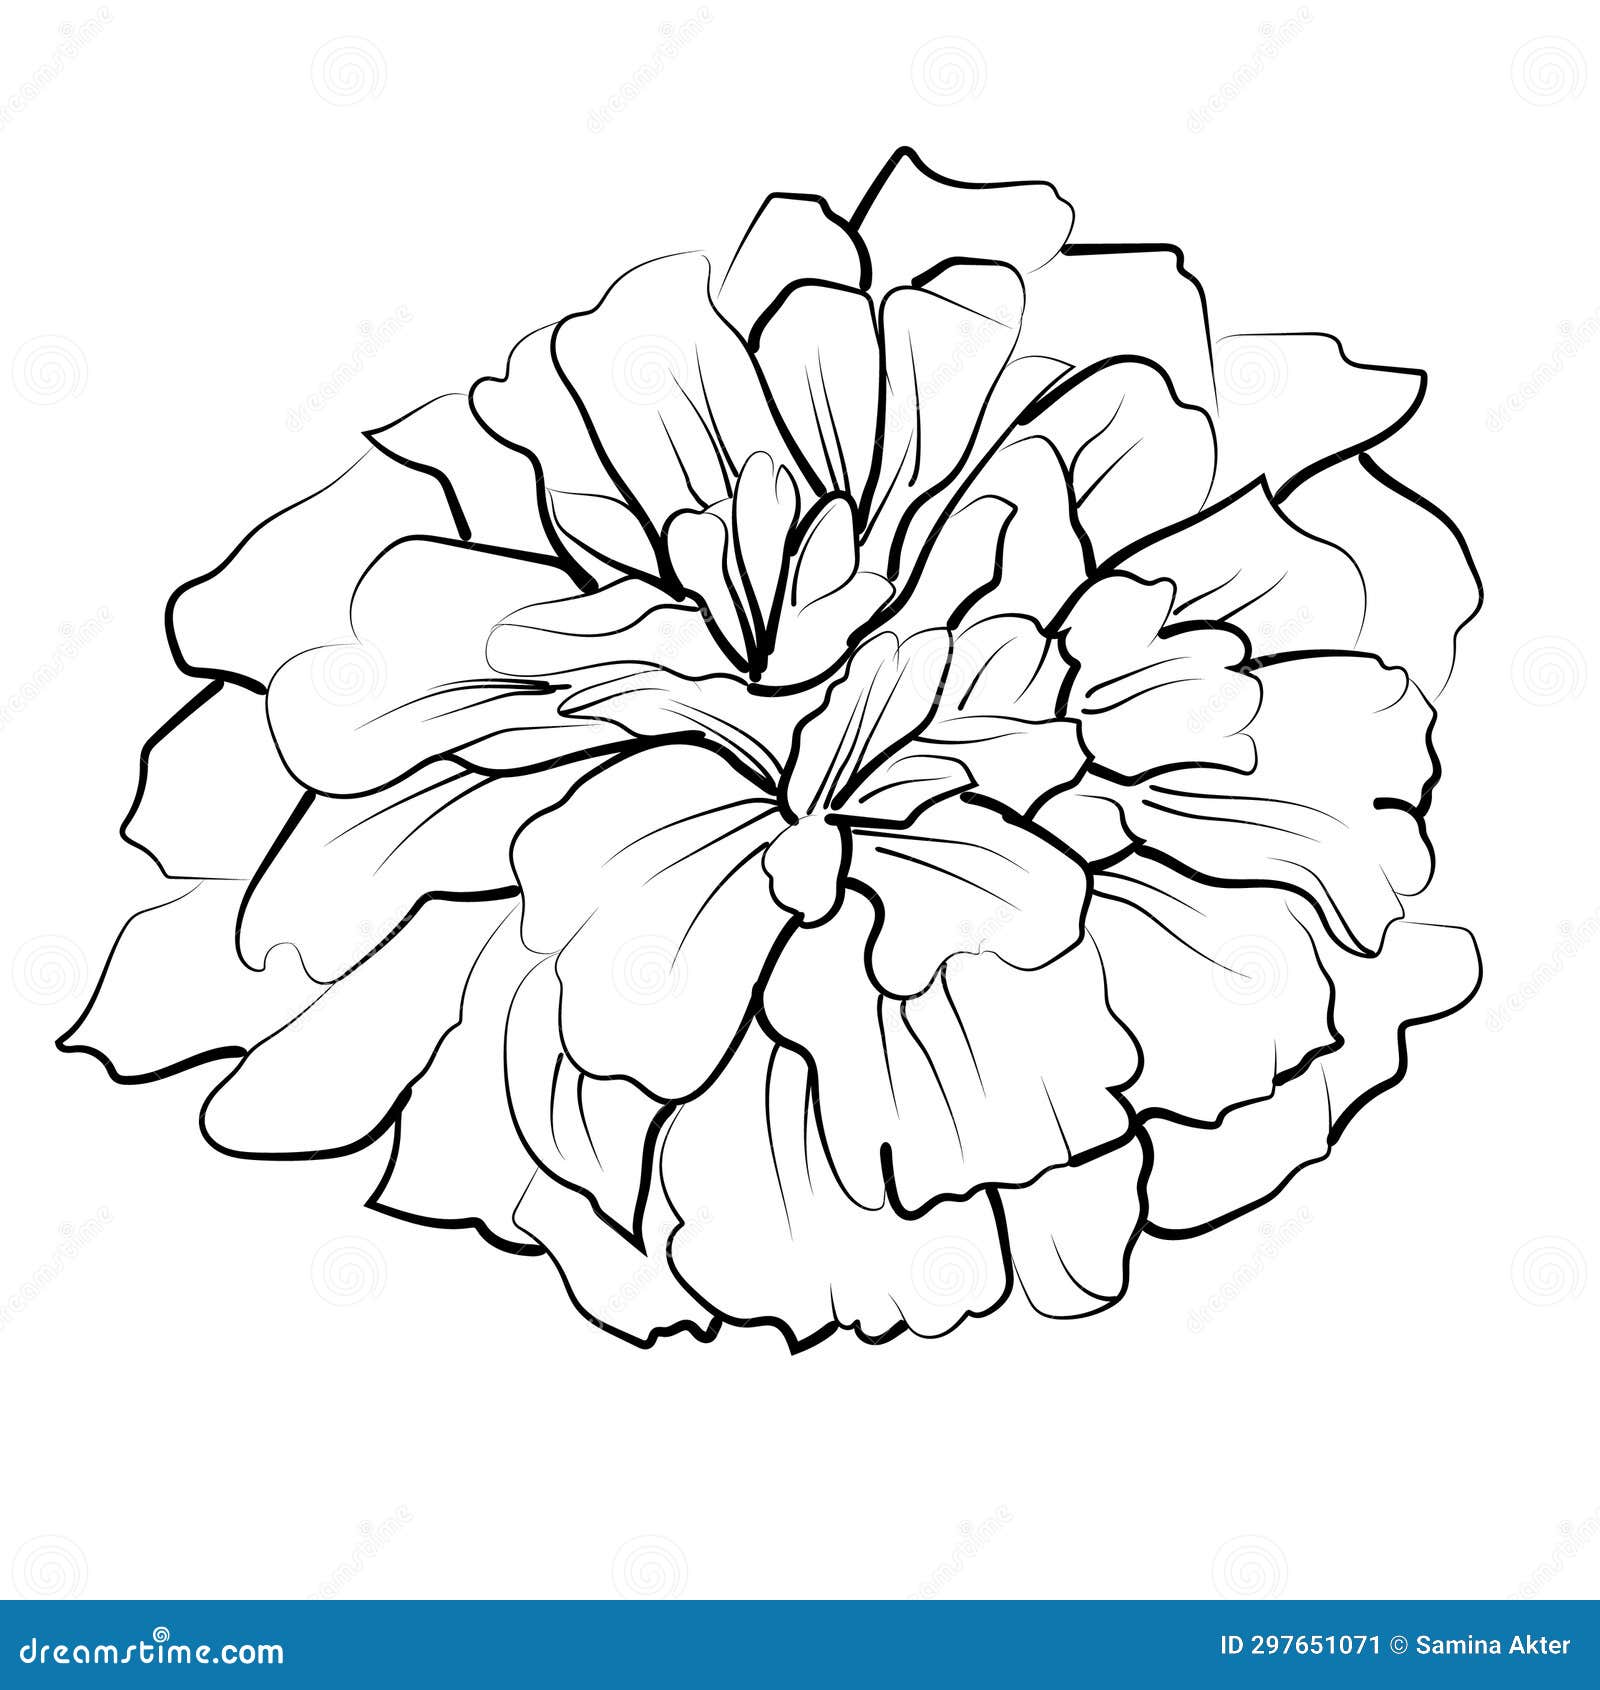 Small october birth flower tattoo, october flower tattoo black and white ~  Clip Art #252493927